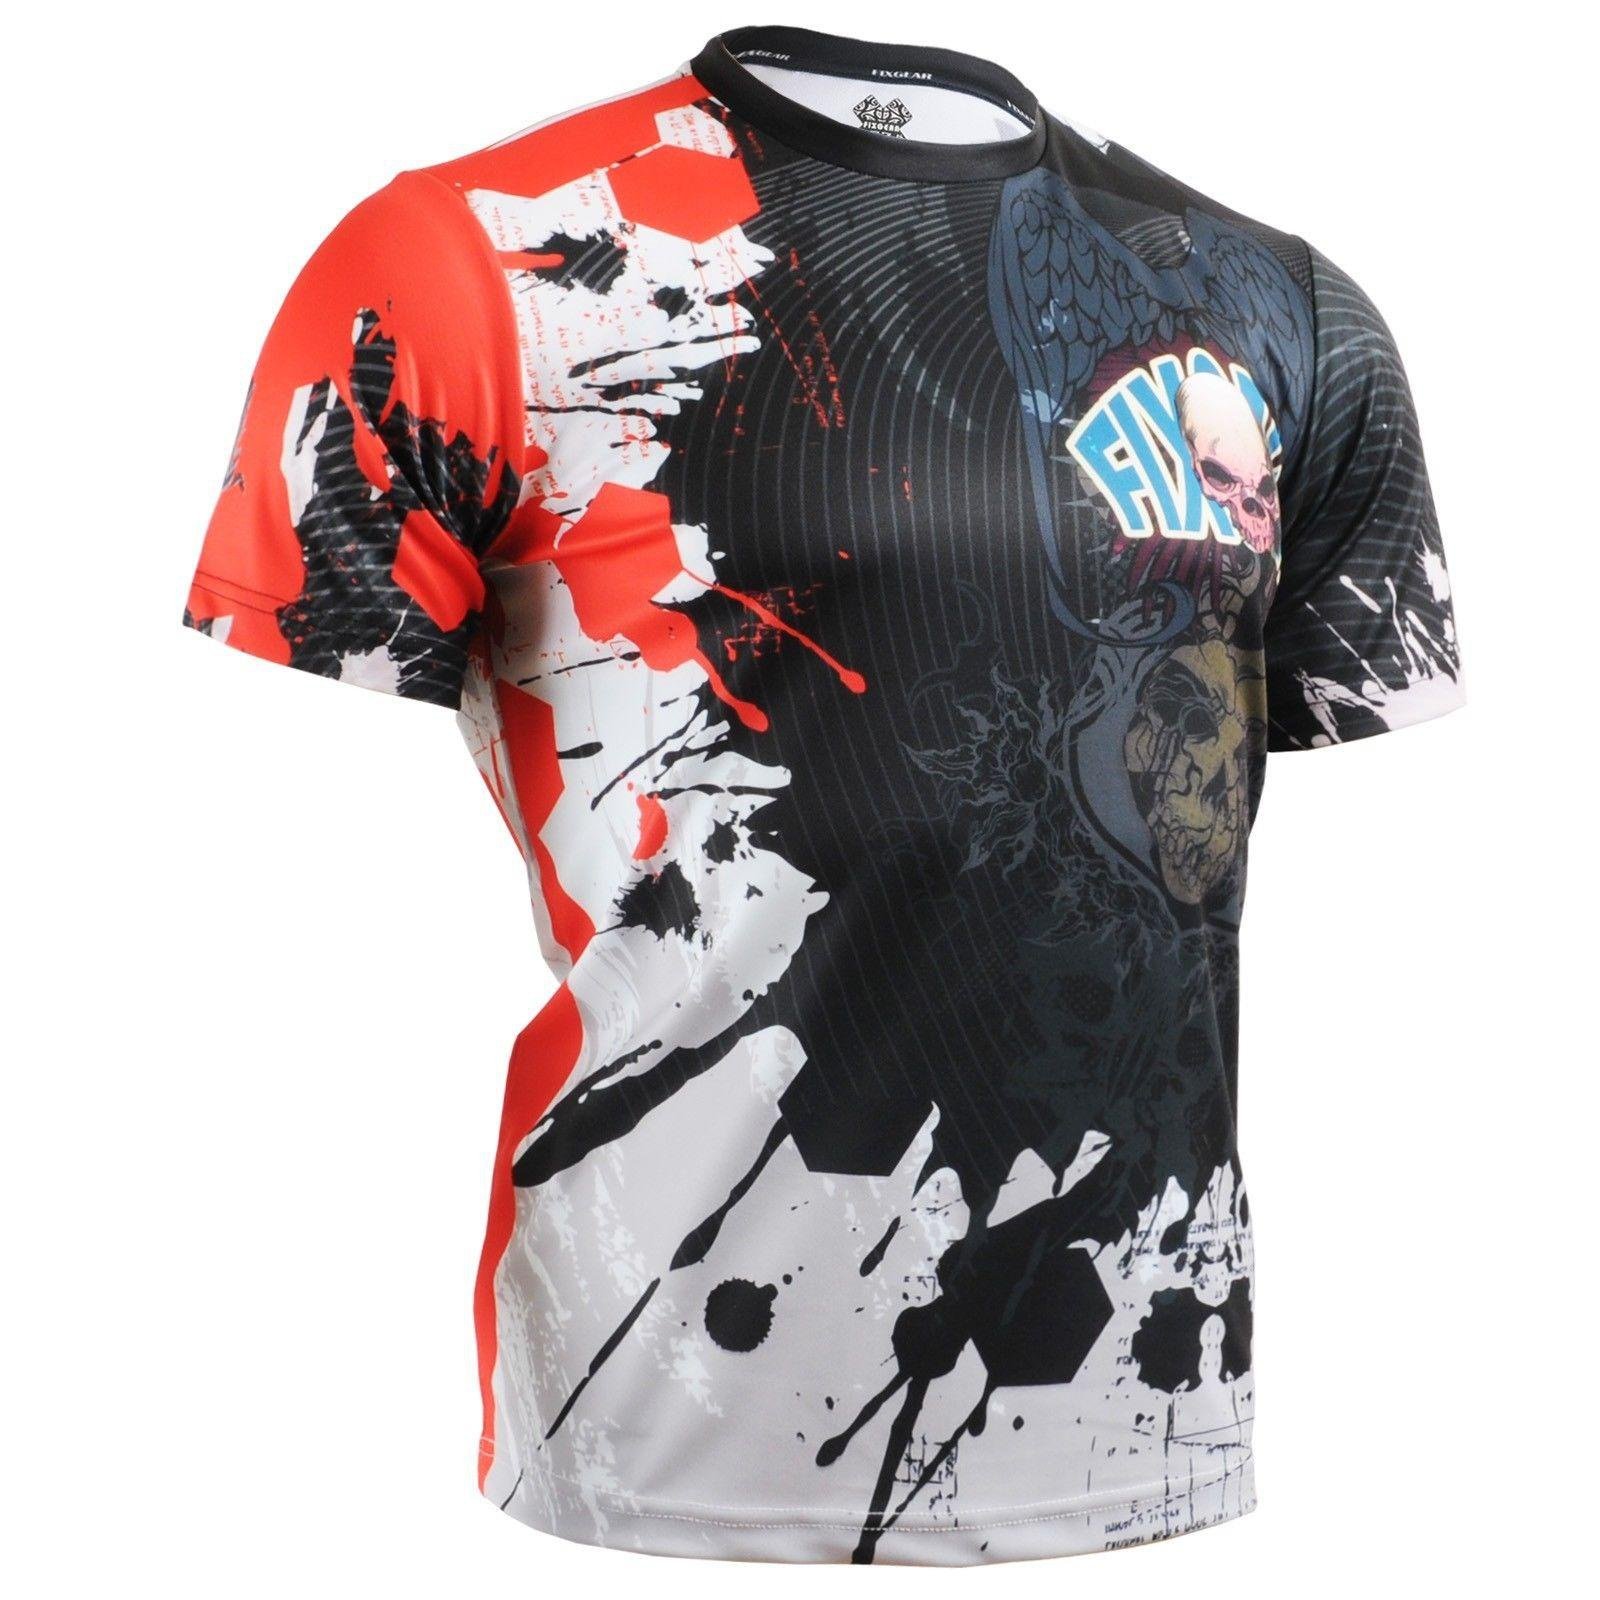 Fixgear RM-4402 T-shirts Sports Active Manches Courtes Hommes.